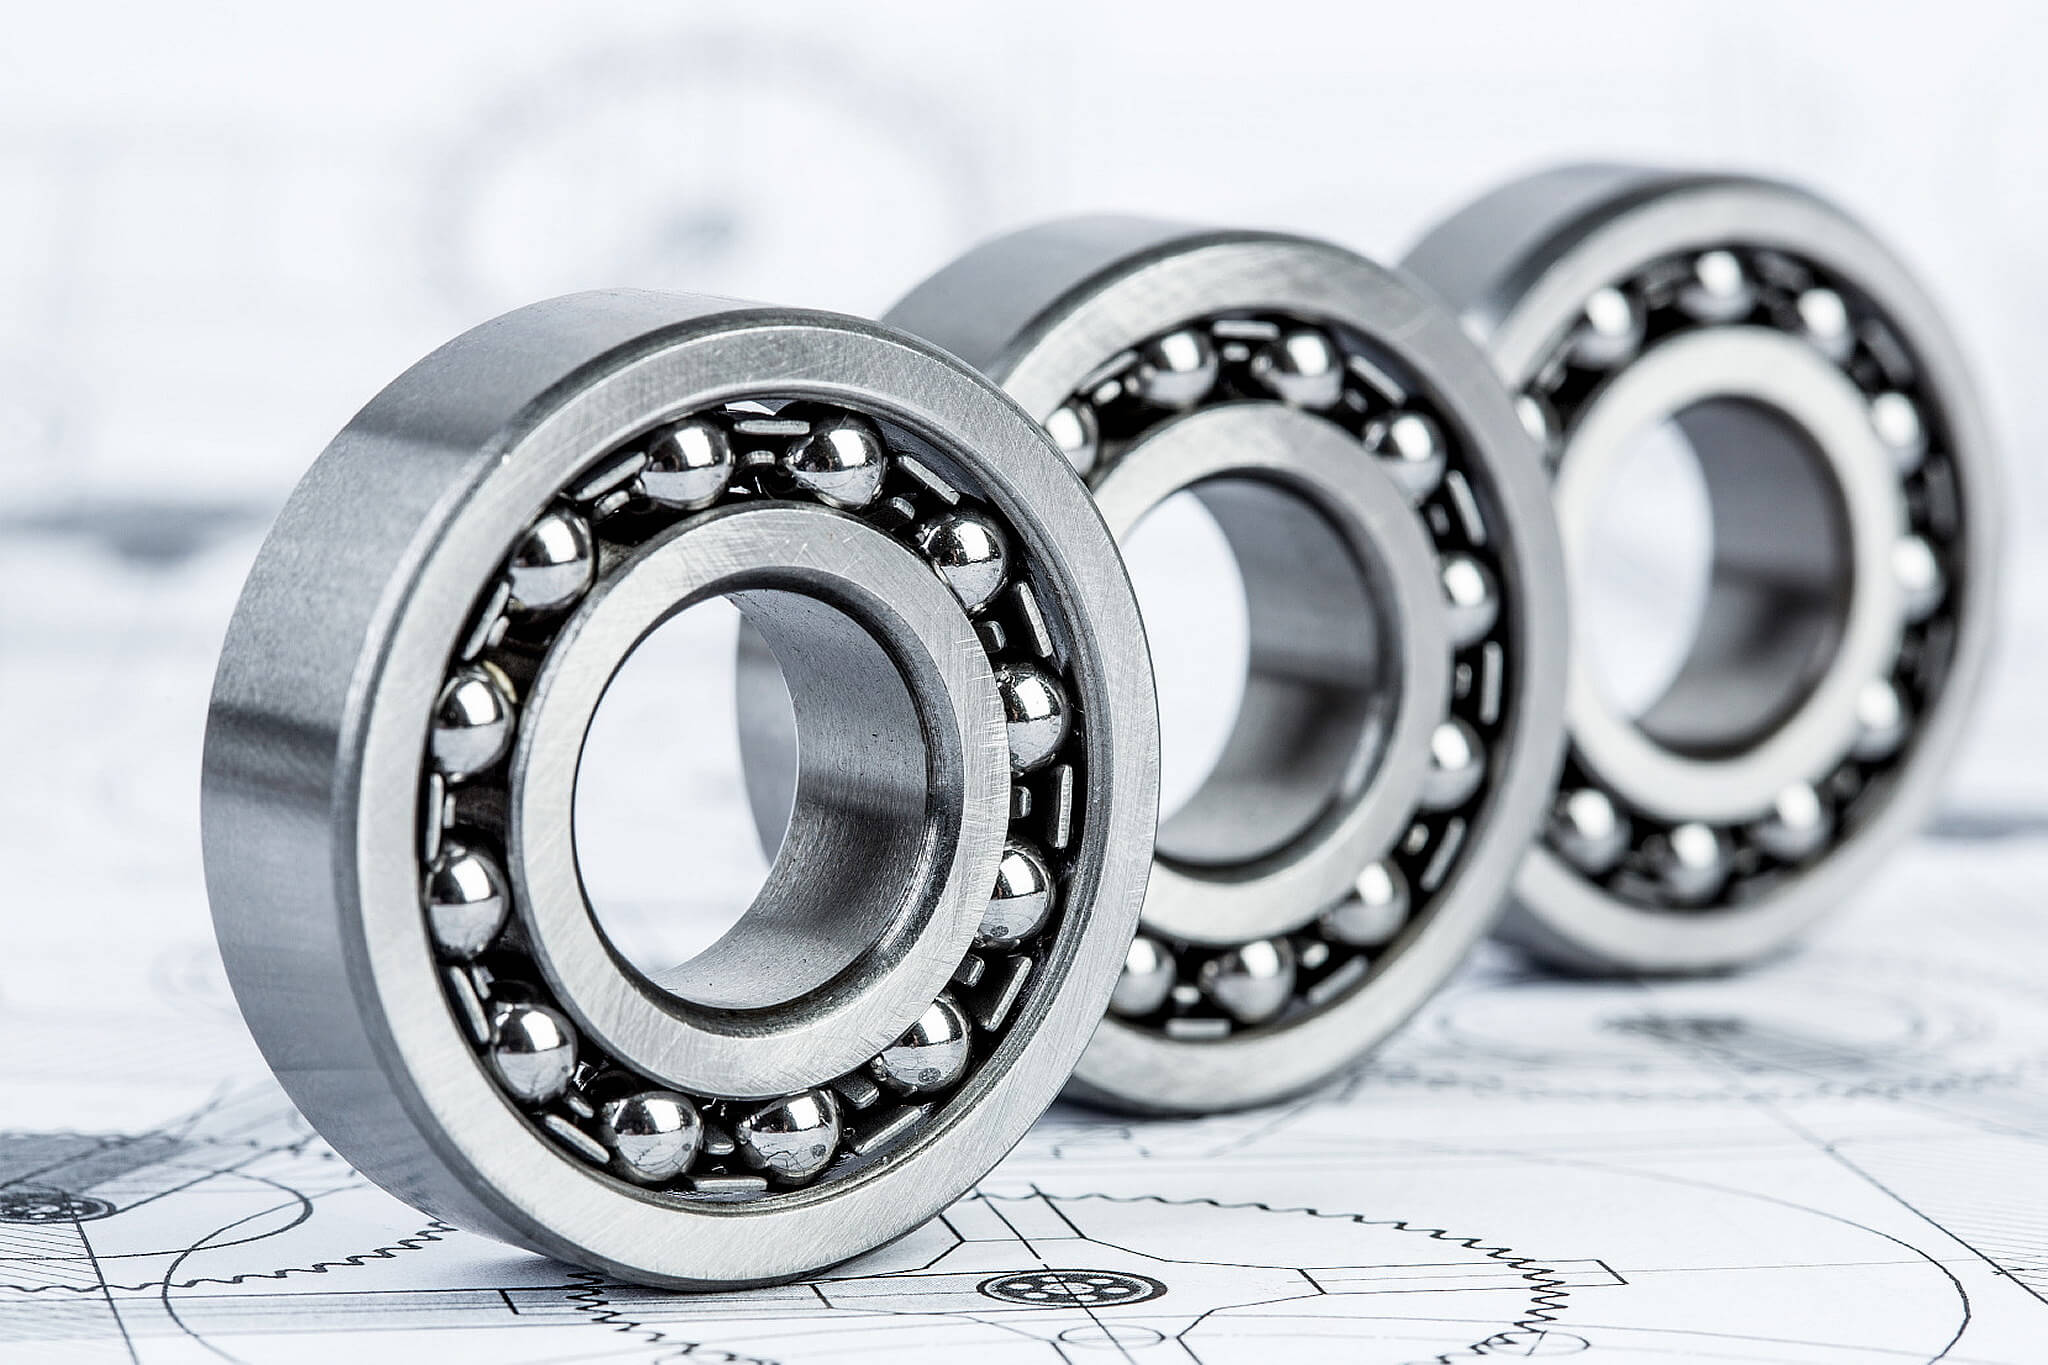 A Leading Bearing Supplier Since 2014